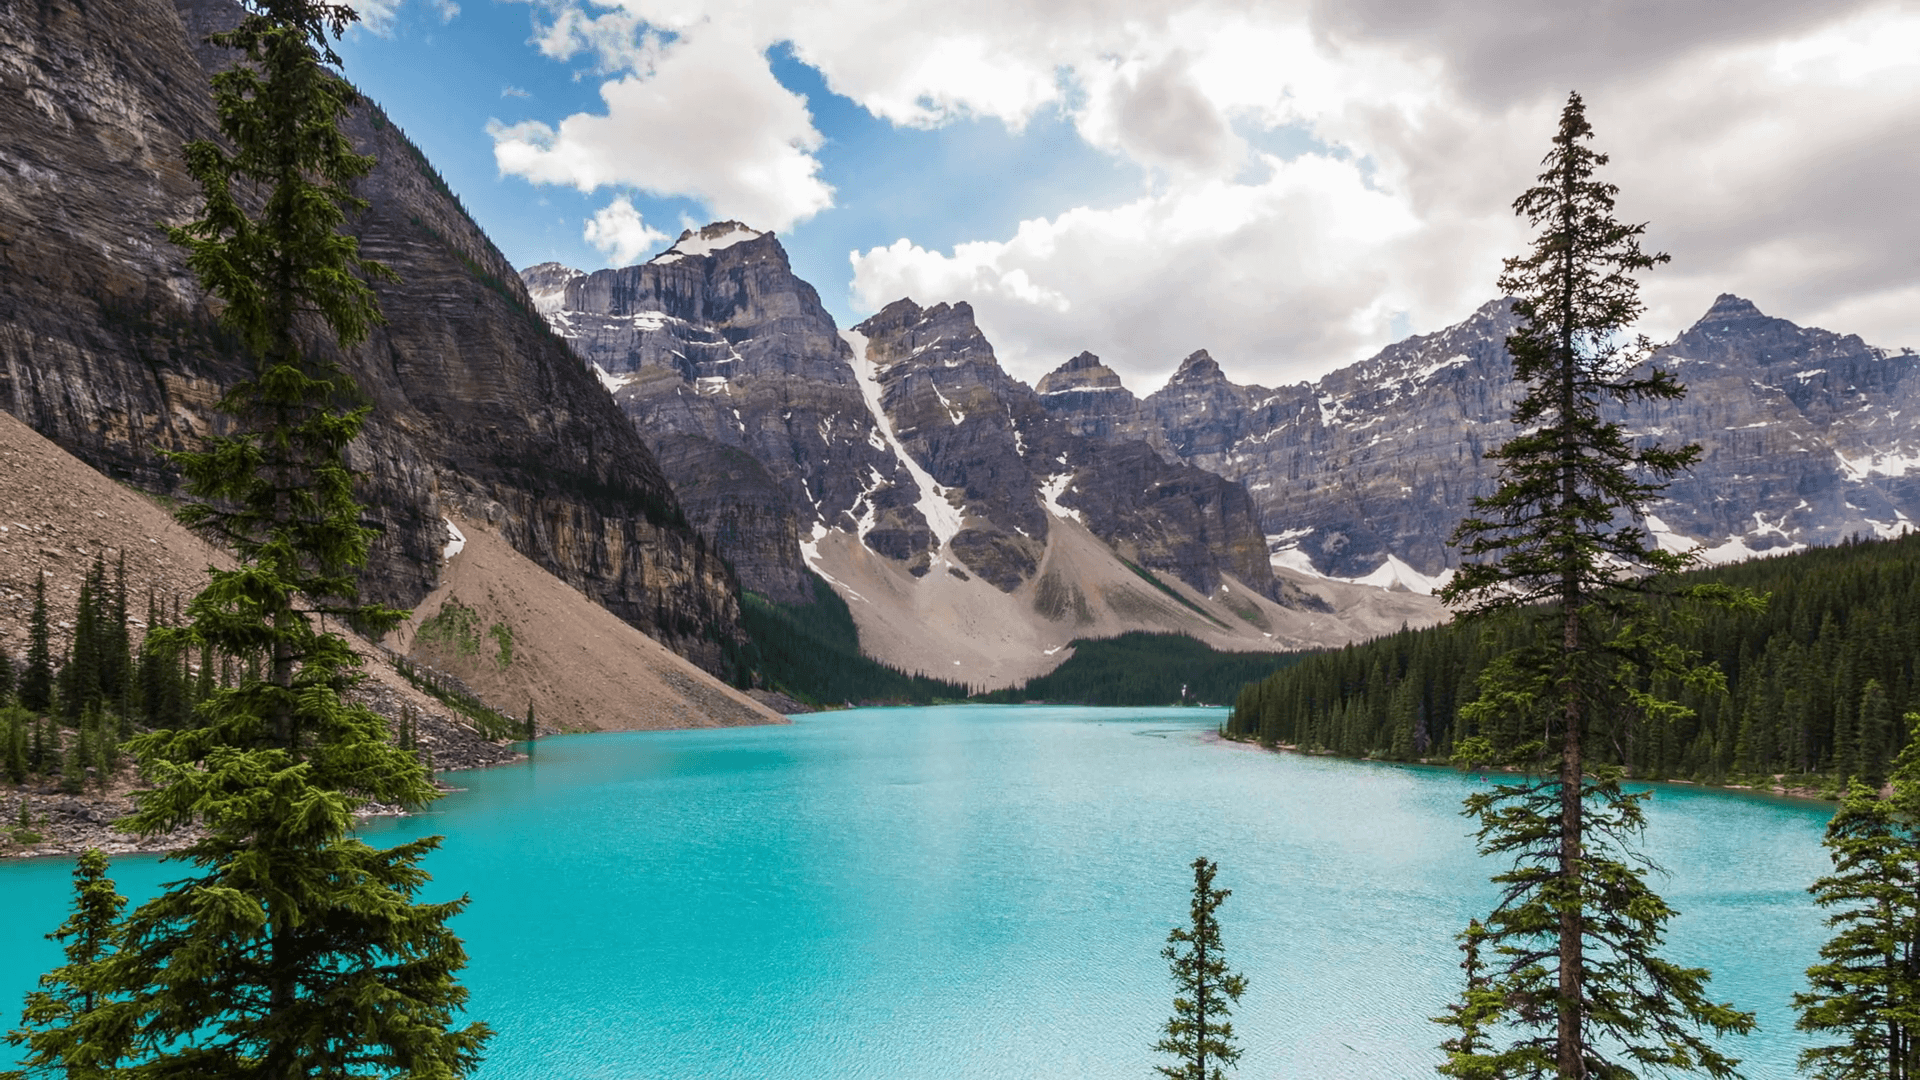 Time Lapse View of Moraine Lake in Banff National Park, Canadian